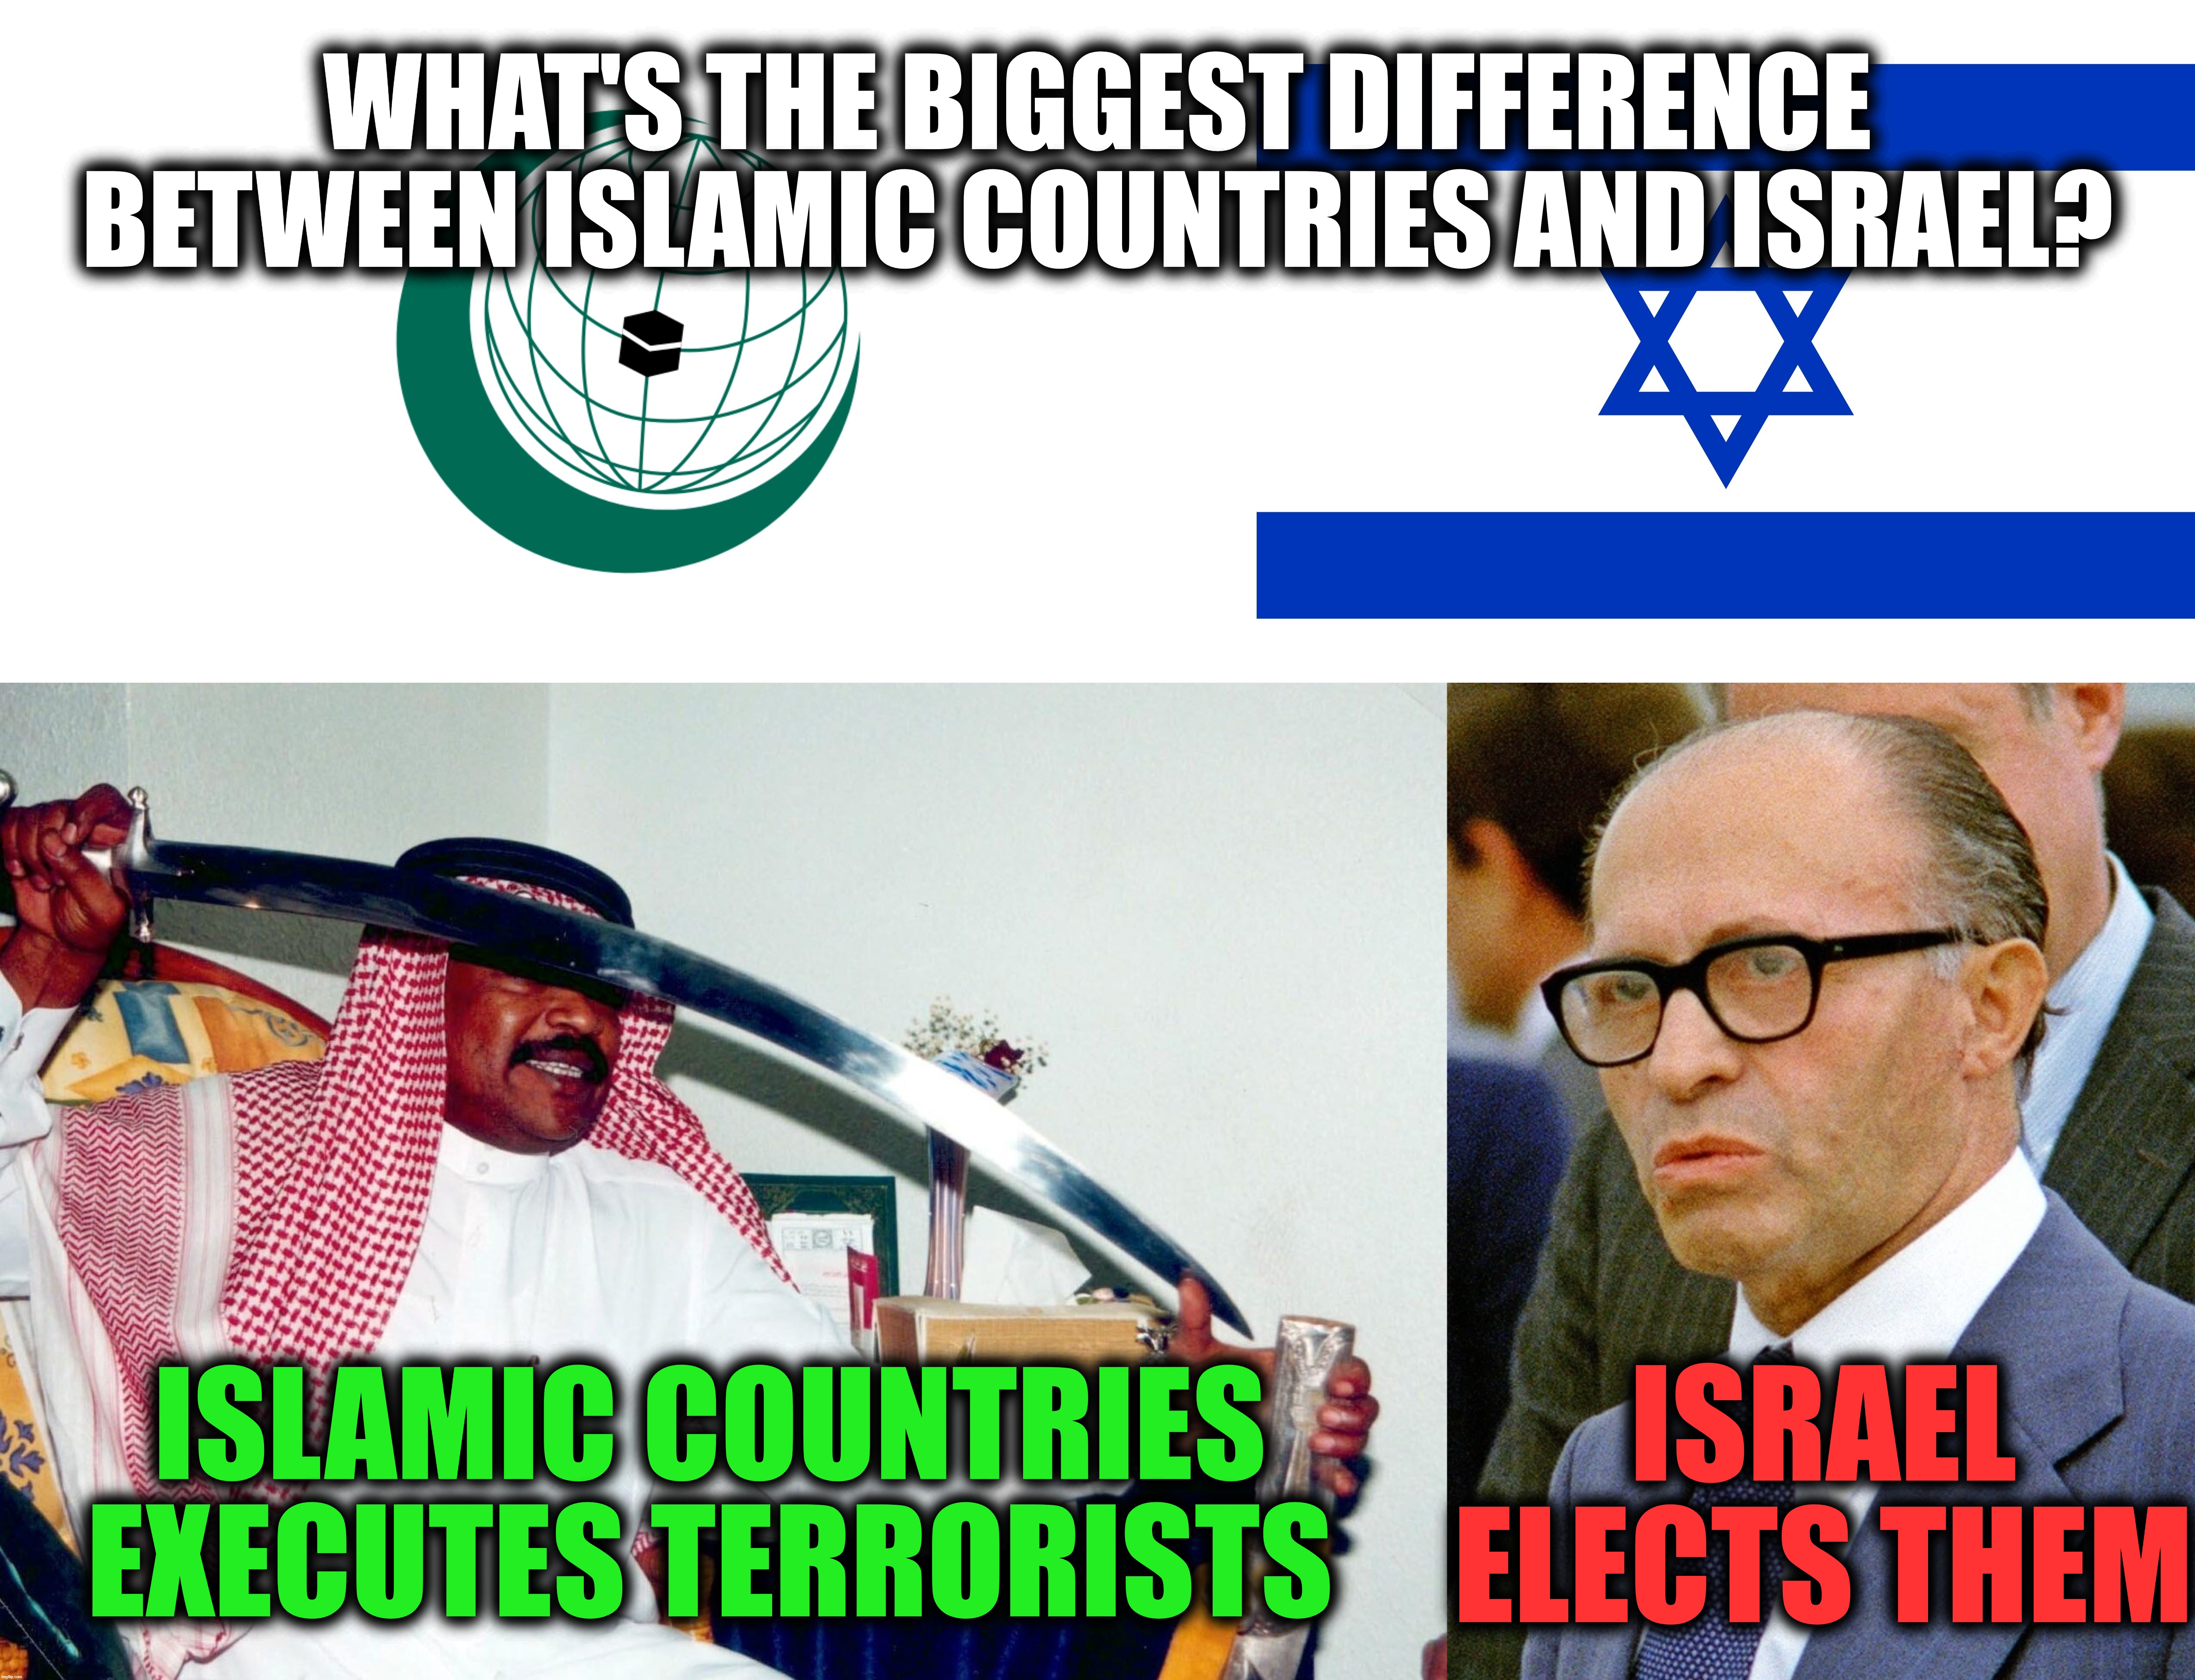 The Biggest Difference Between Islamic Countries And Israel (For the Last Time, I'm Not Making This Up) | WHAT'S THE BIGGEST DIFFERENCE BETWEEN ISLAMIC COUNTRIES AND ISRAEL? ISLAMIC COUNTRIES EXECUTES TERRORISTS; ISRAEL ELECTS THEM | image tagged in israel,different,difference,know the difference,corruption,government corruption | made w/ Imgflip meme maker